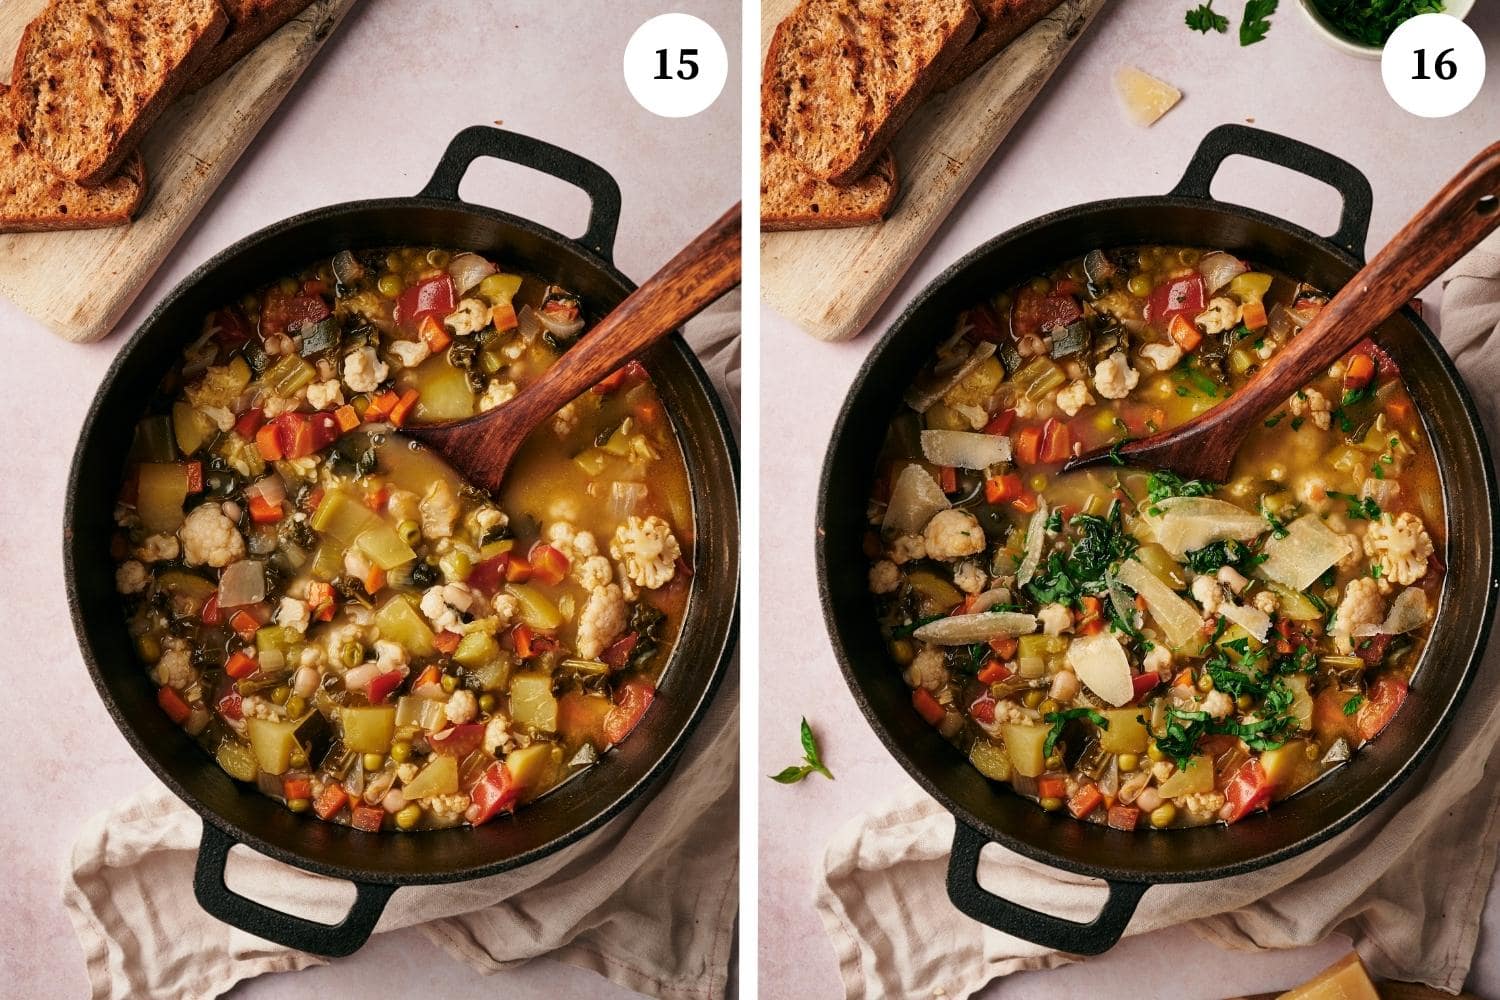 Step by step process for making minestrone soup: don't overcook the veggies.